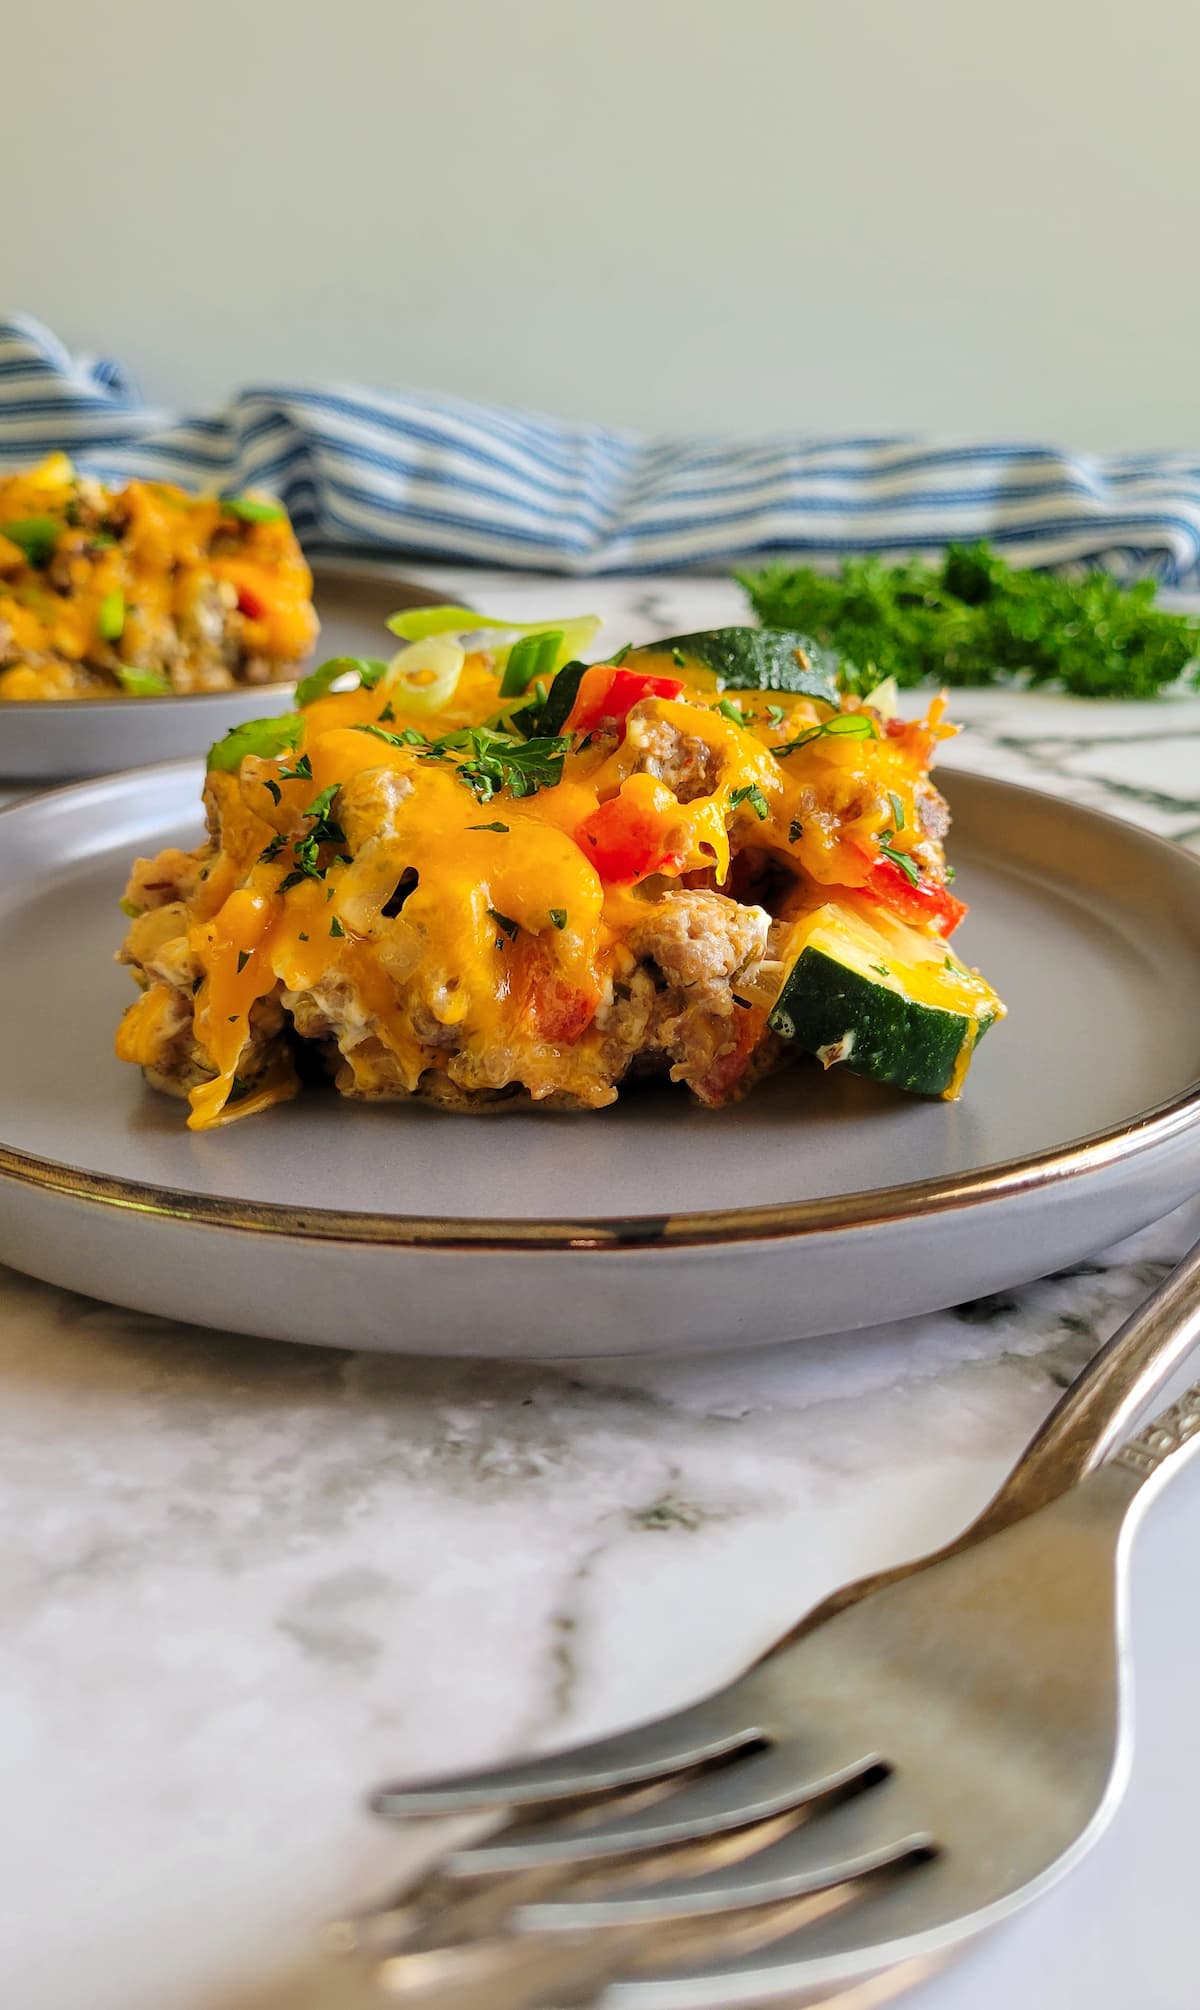 slice of sausage casserole with zucchini, melted cheddar and other veggies on a plate, another plate of it in the background